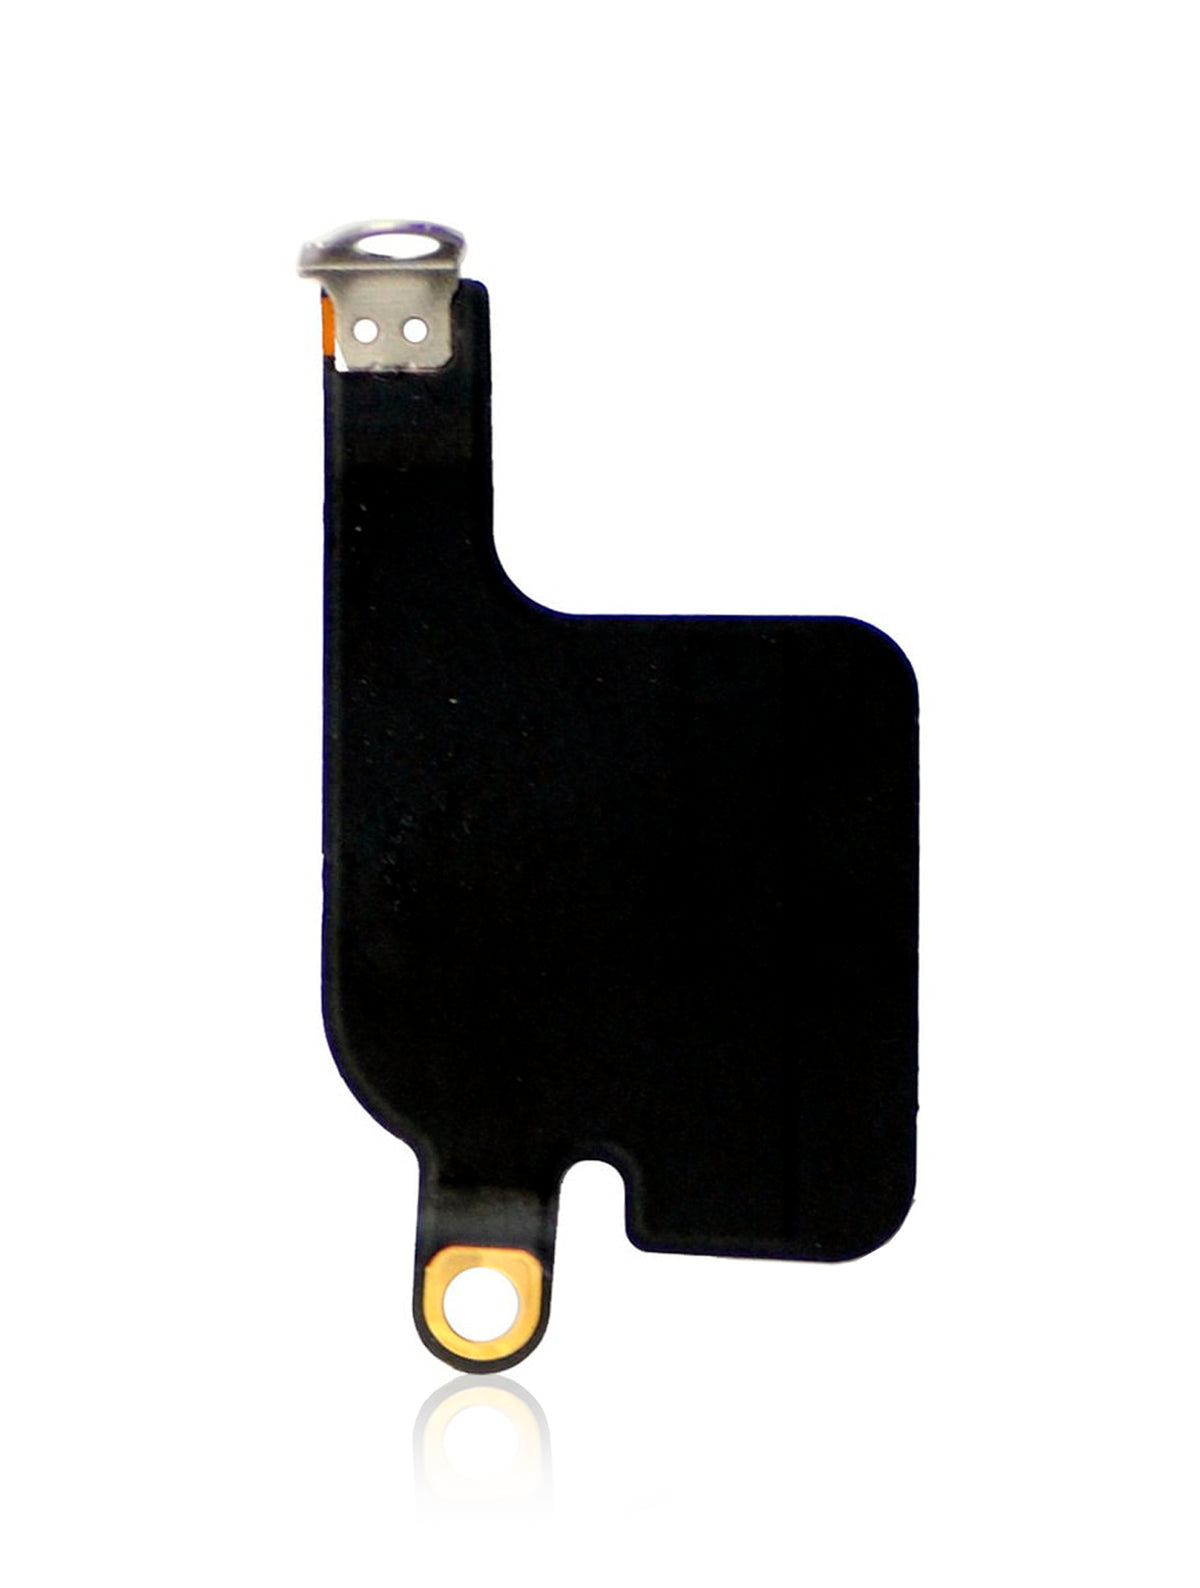 LOUDSPEAKER FLEX CABLE COMPATIBLE WITH IPHONE 5S